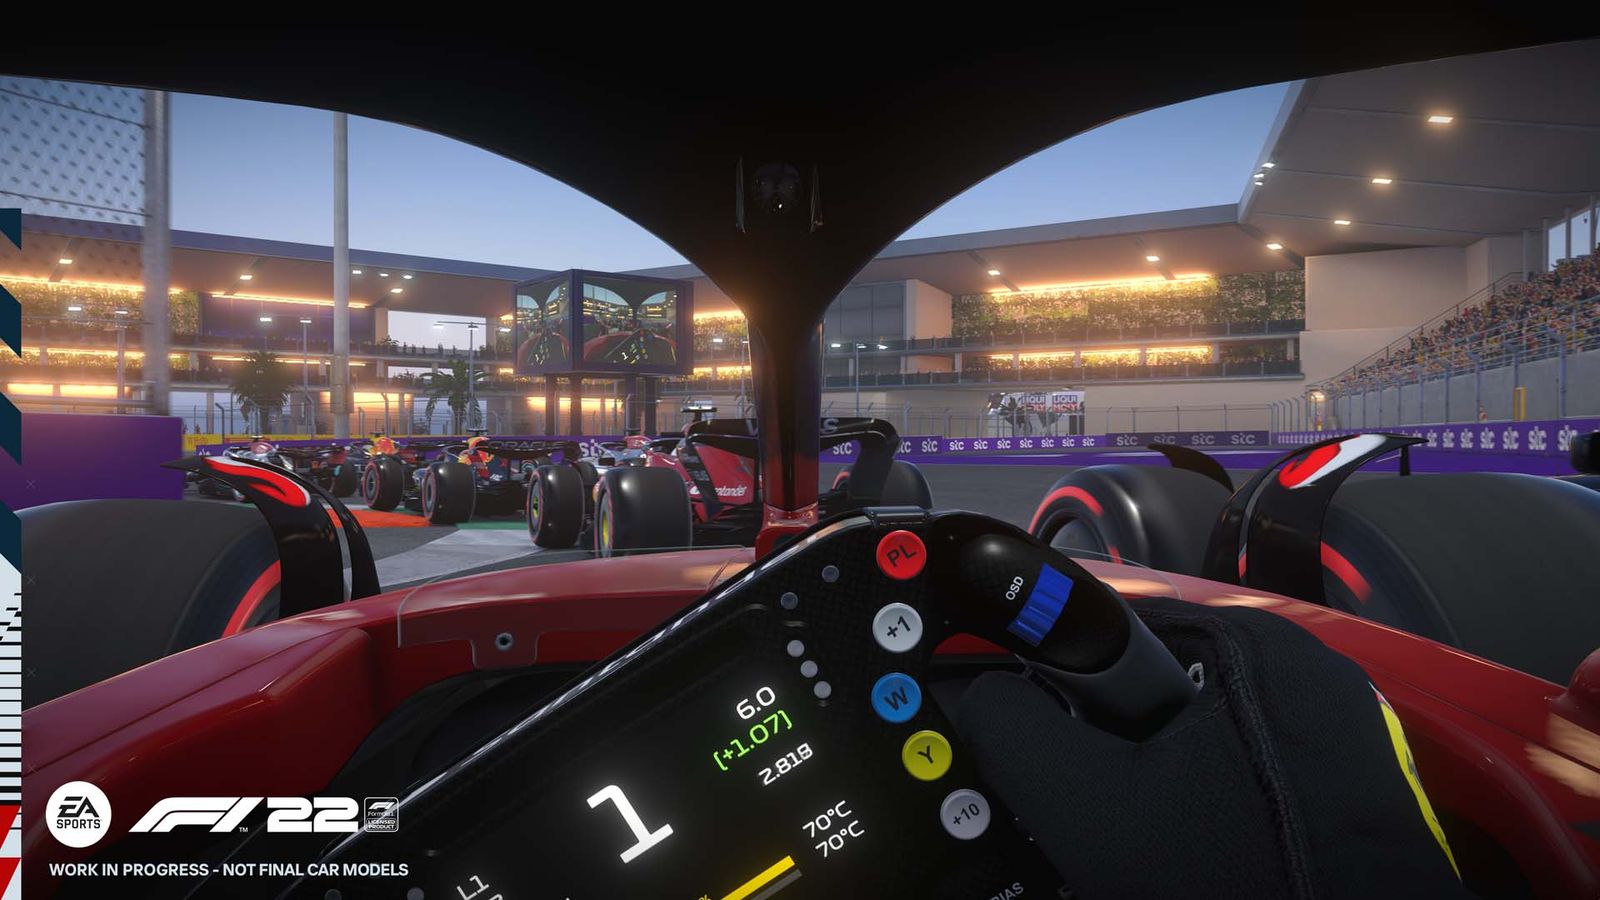 ALL OF THE LIGHTS: F1 2022 will look even better in UHD